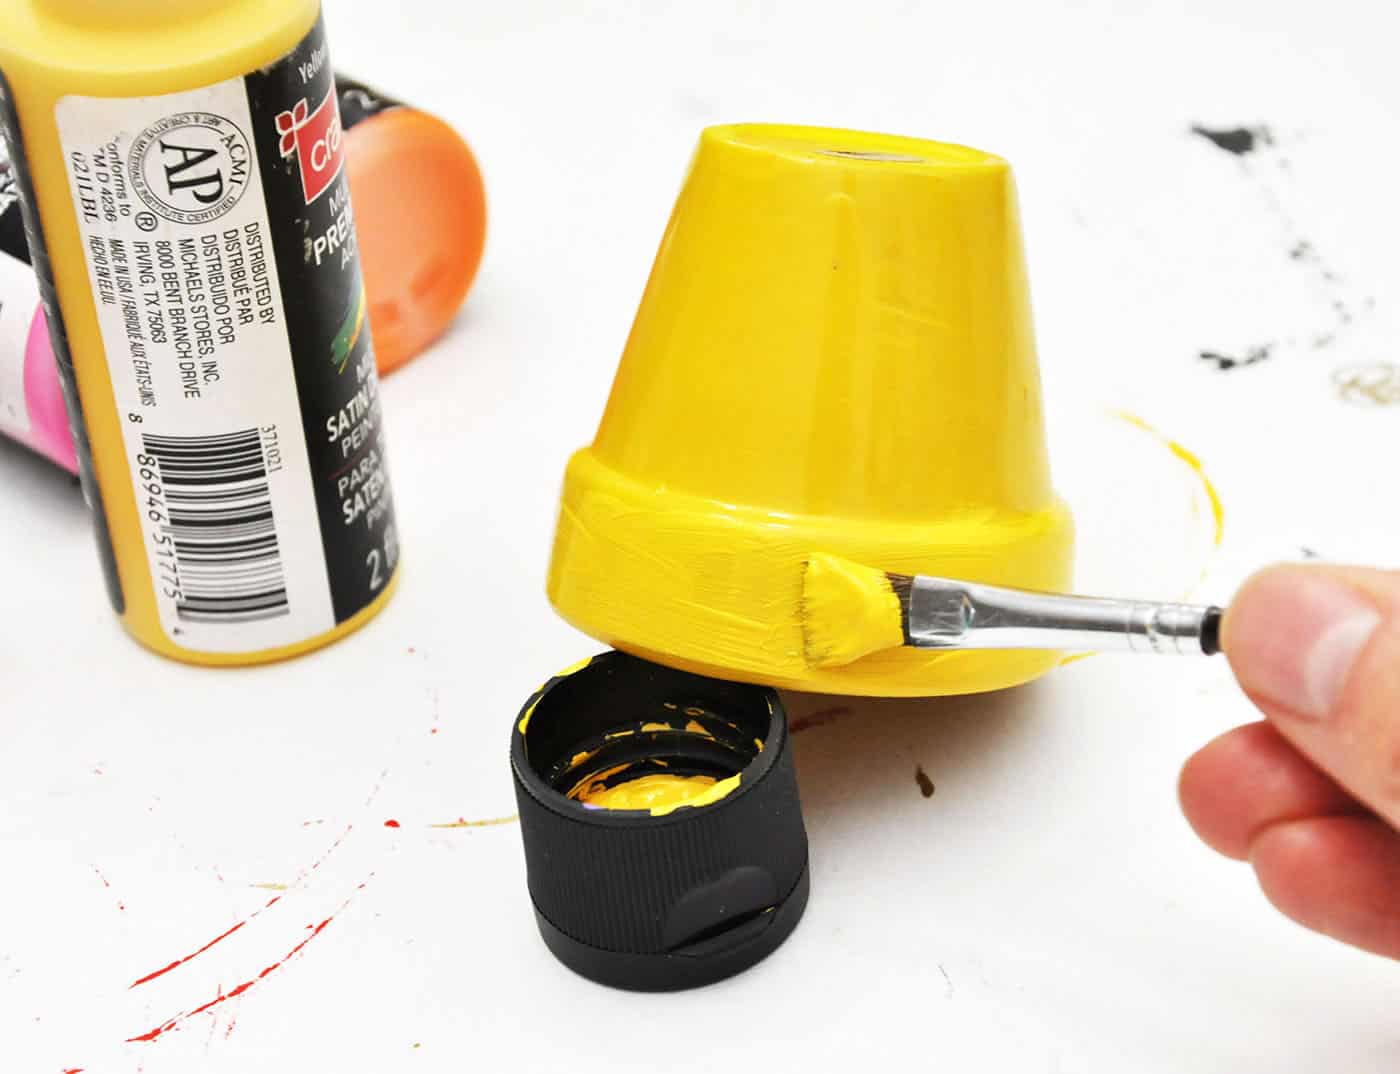 Painting a terra cotta pot with yellow paint using a paint brush